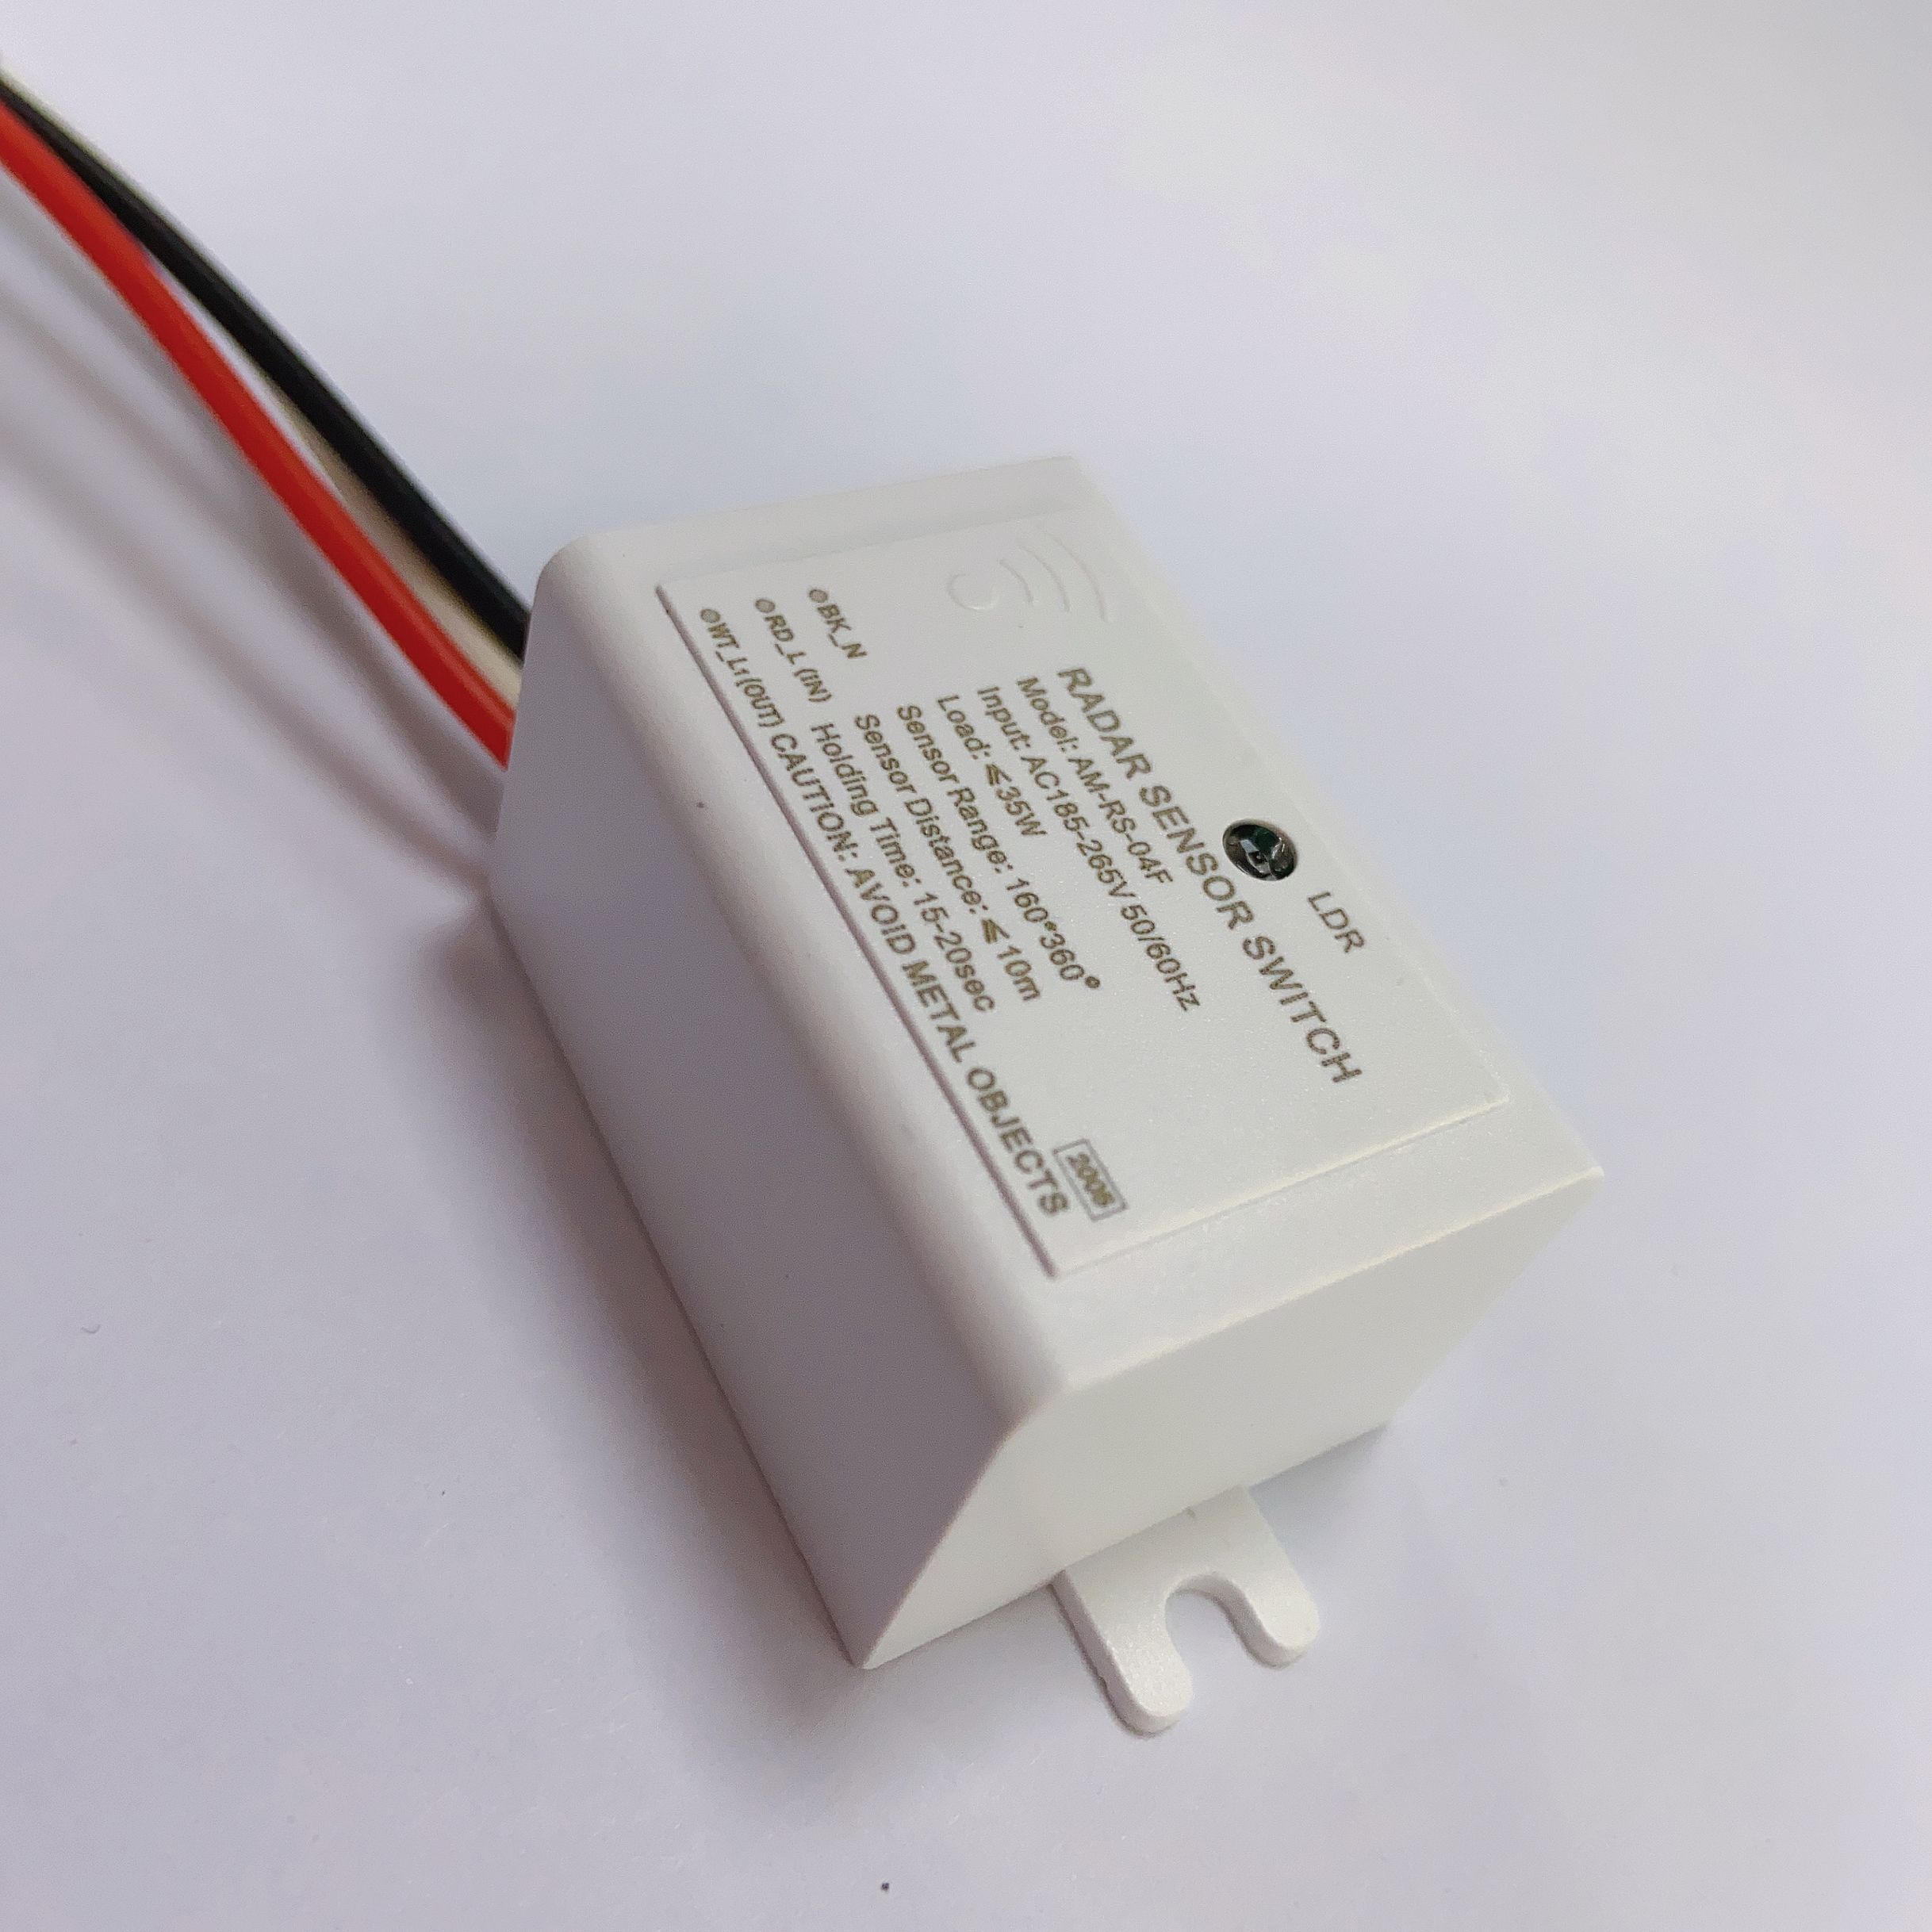 AM-RS-04F Retrofit Auto On Off Lighting Control Microwave Motion Sensor Switch for Corridor Pathway Porch Stair